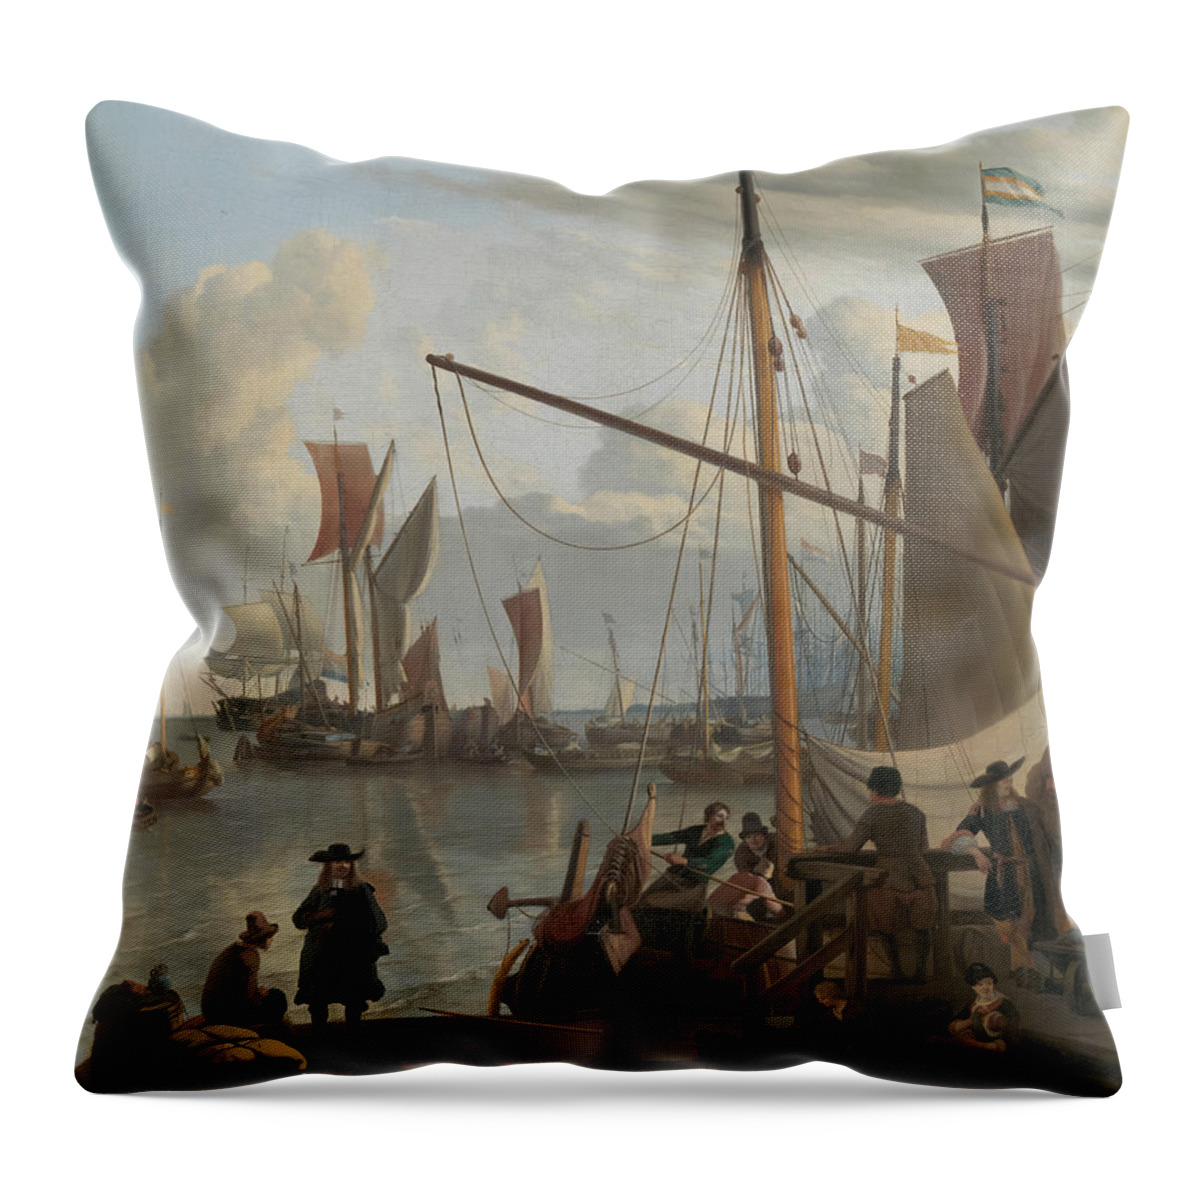 Y Throw Pillow featuring the painting The Y at Amsterdam by Ludolf Bakhuysen